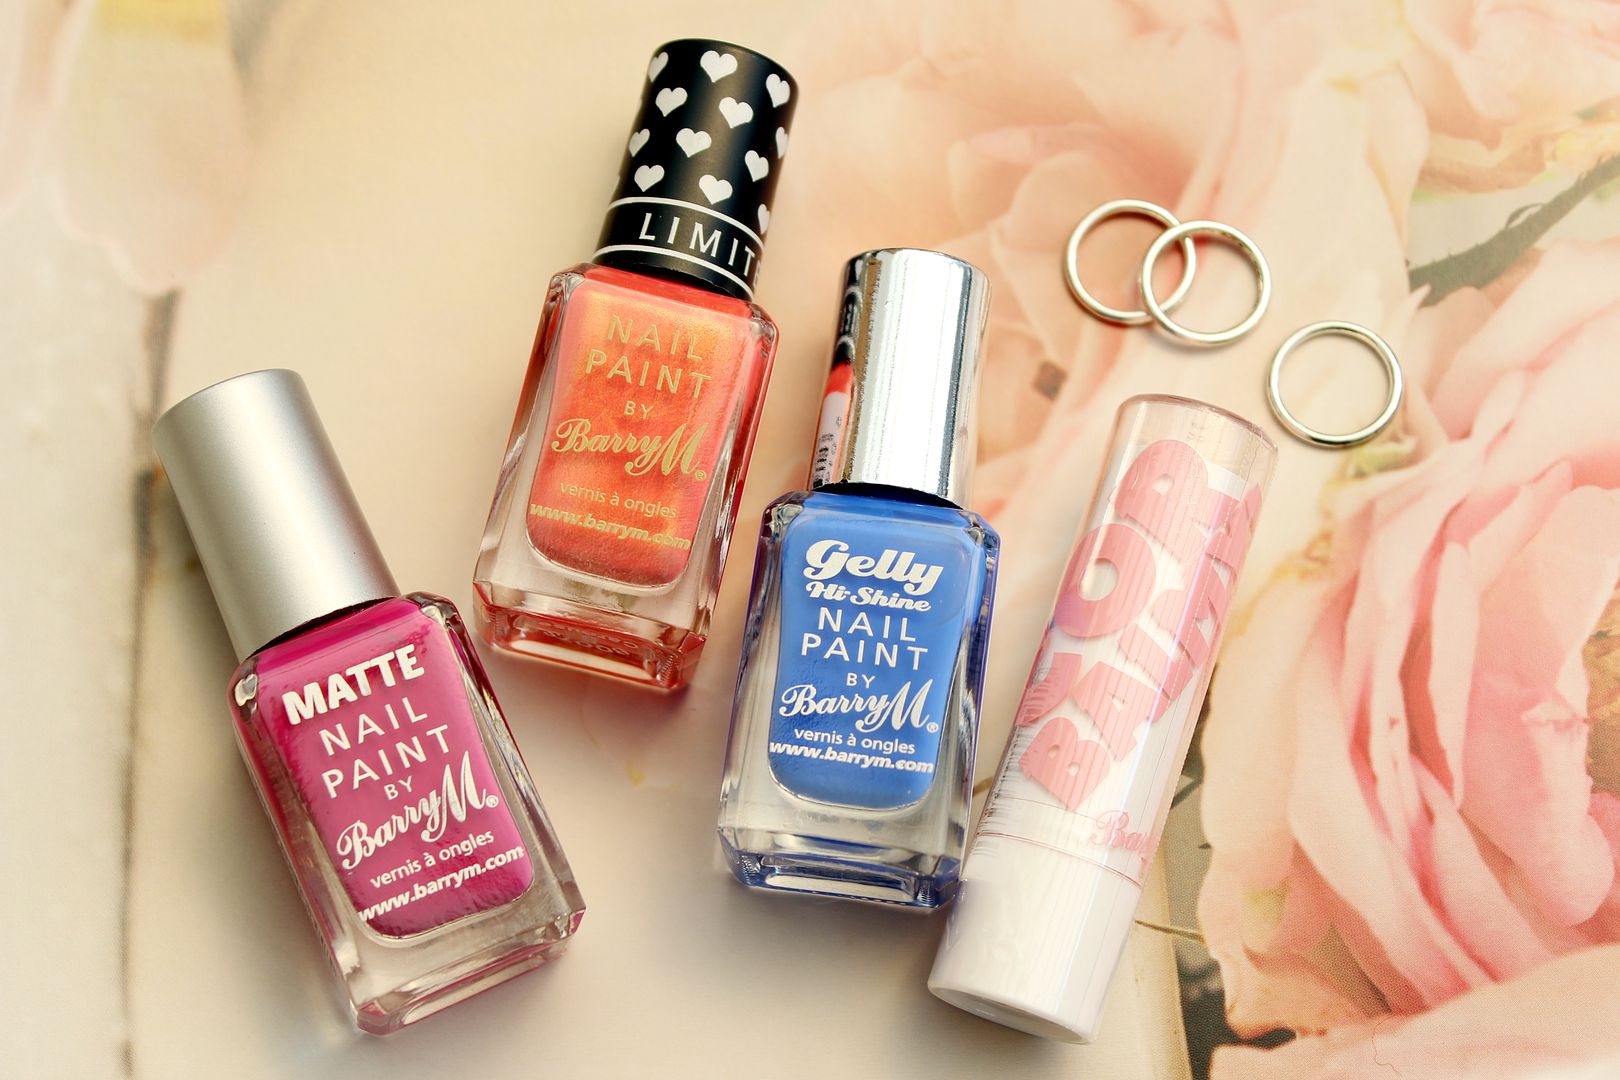 New releases from Barry M